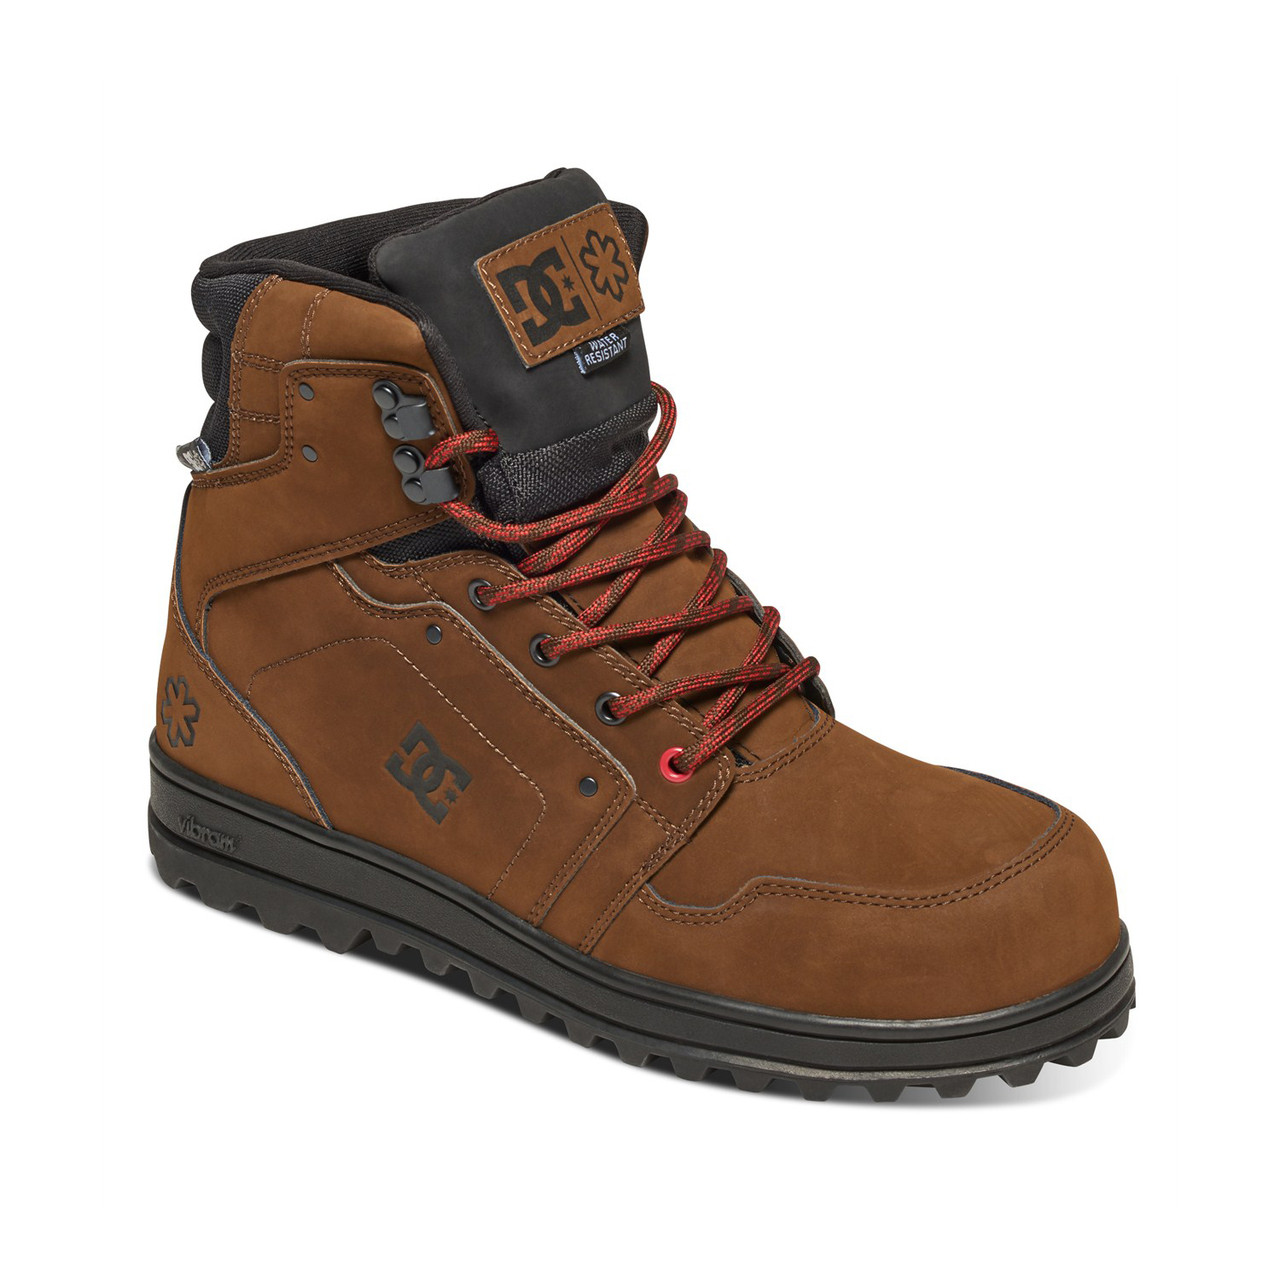 DC Shoes SPT MOUNTAIN WORK BOOTS BROWN 